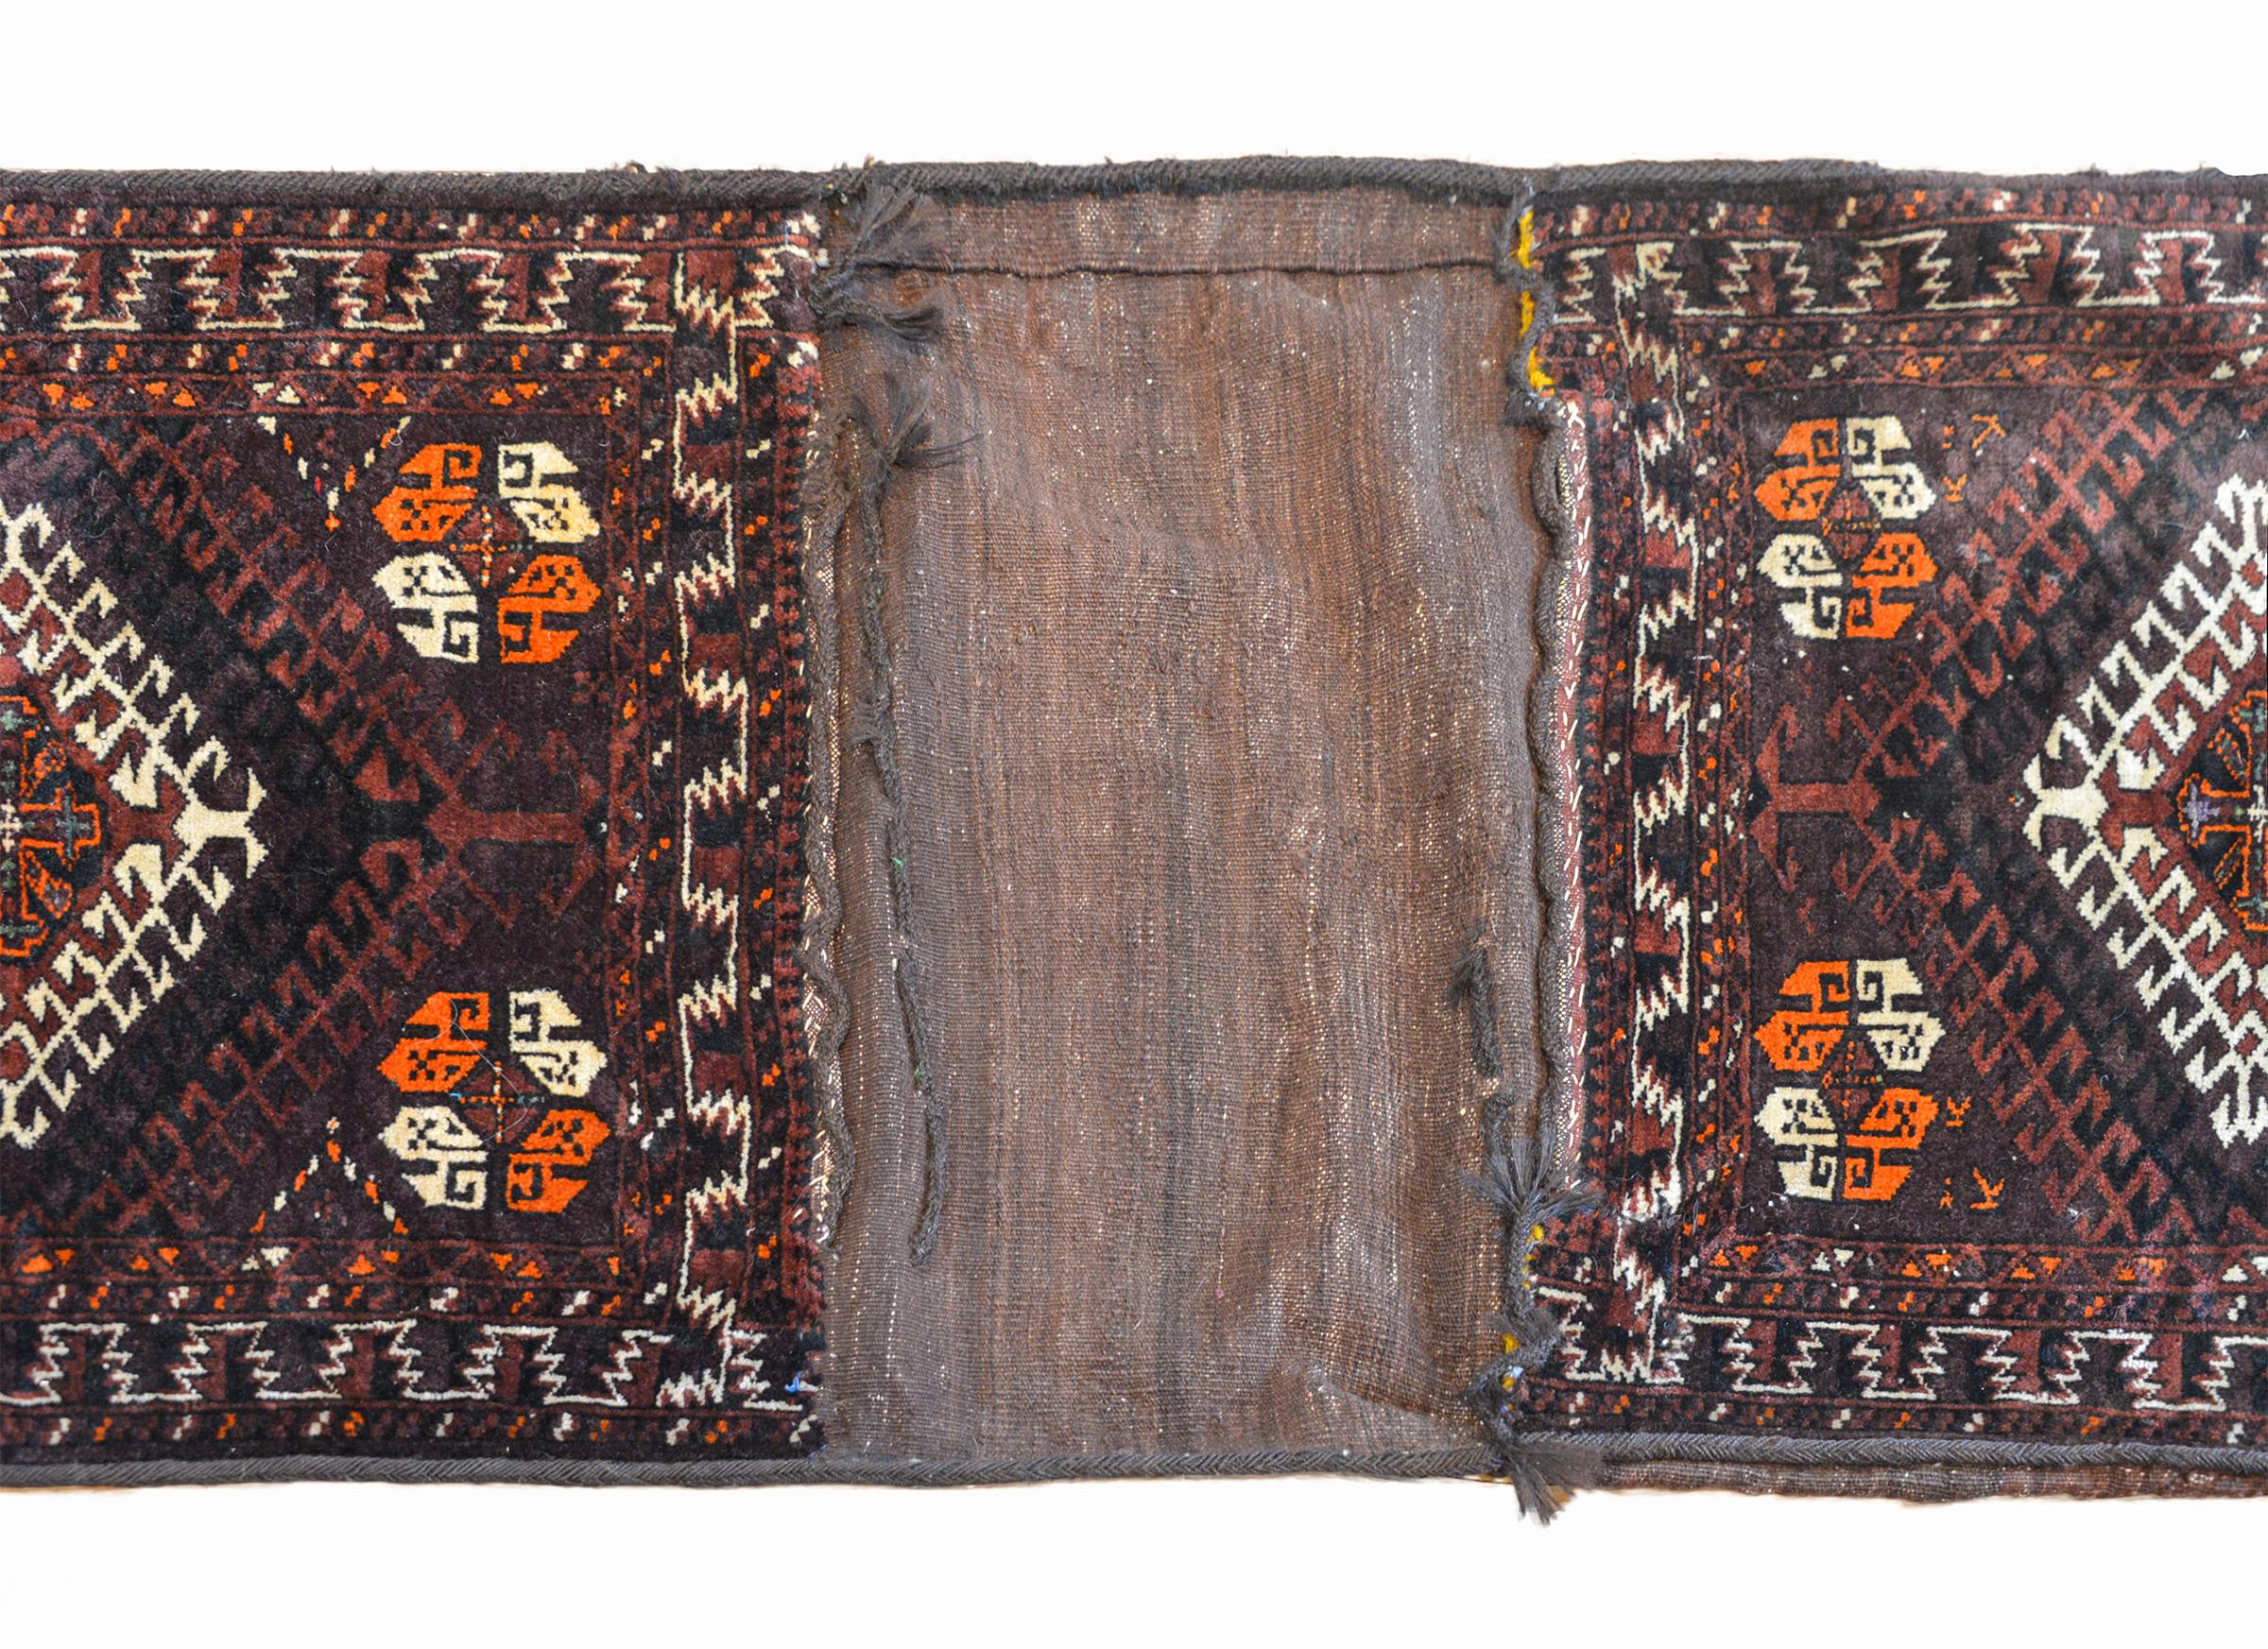 An early 20th century Persian Baluch saddle bag rug with each face having two white diamonds surrounded by two shades of brown, black, and copper colored wool. The borders are geometric woven in similarly colored wool.